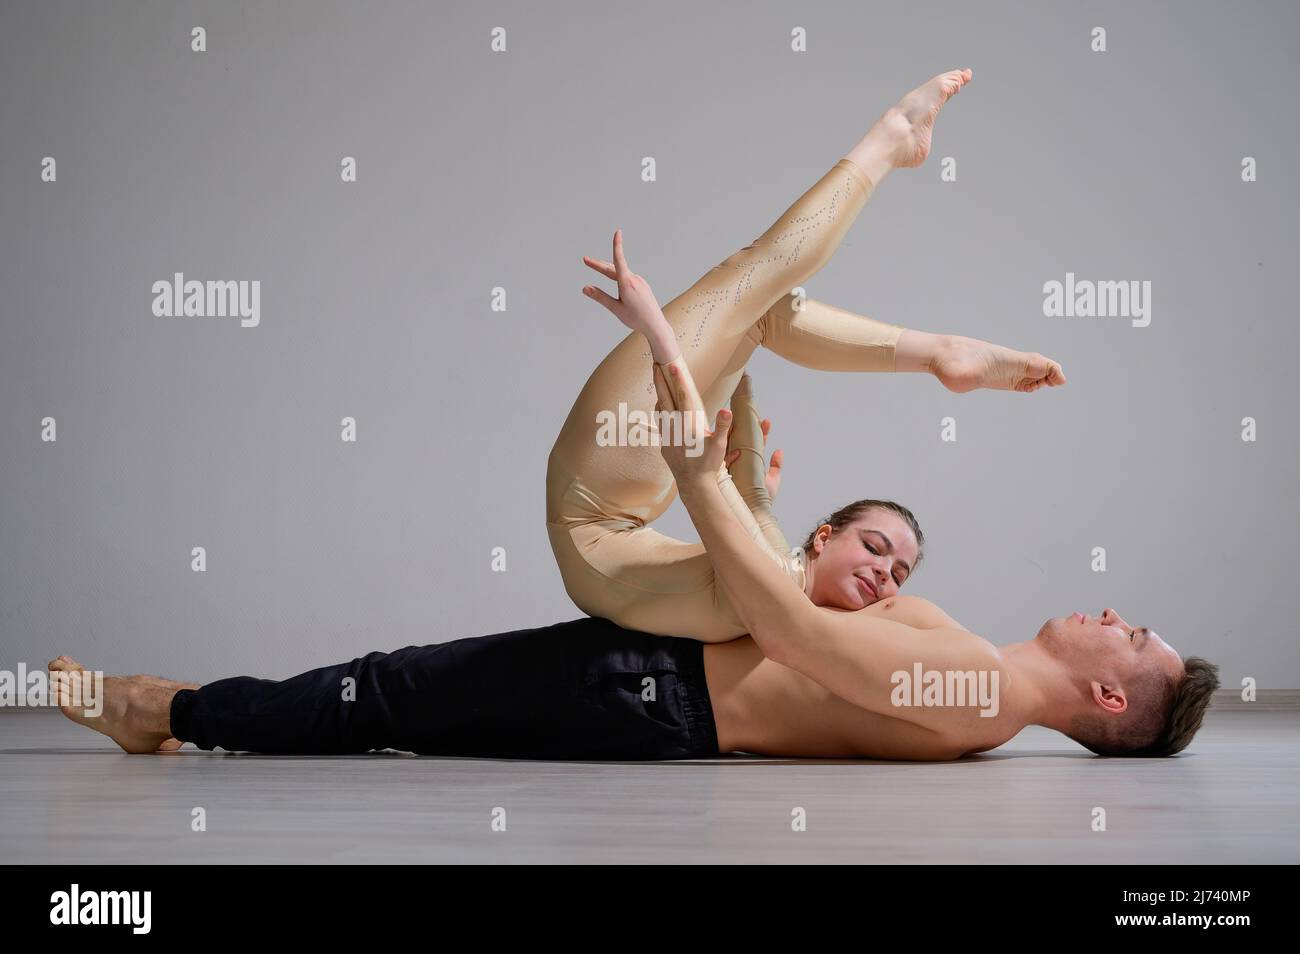 Two Women Finding Balance In A Yoga Pose by Stocksy Contributor ISO DUO -  Stocksy, duo yoga poses - thirstymag.com